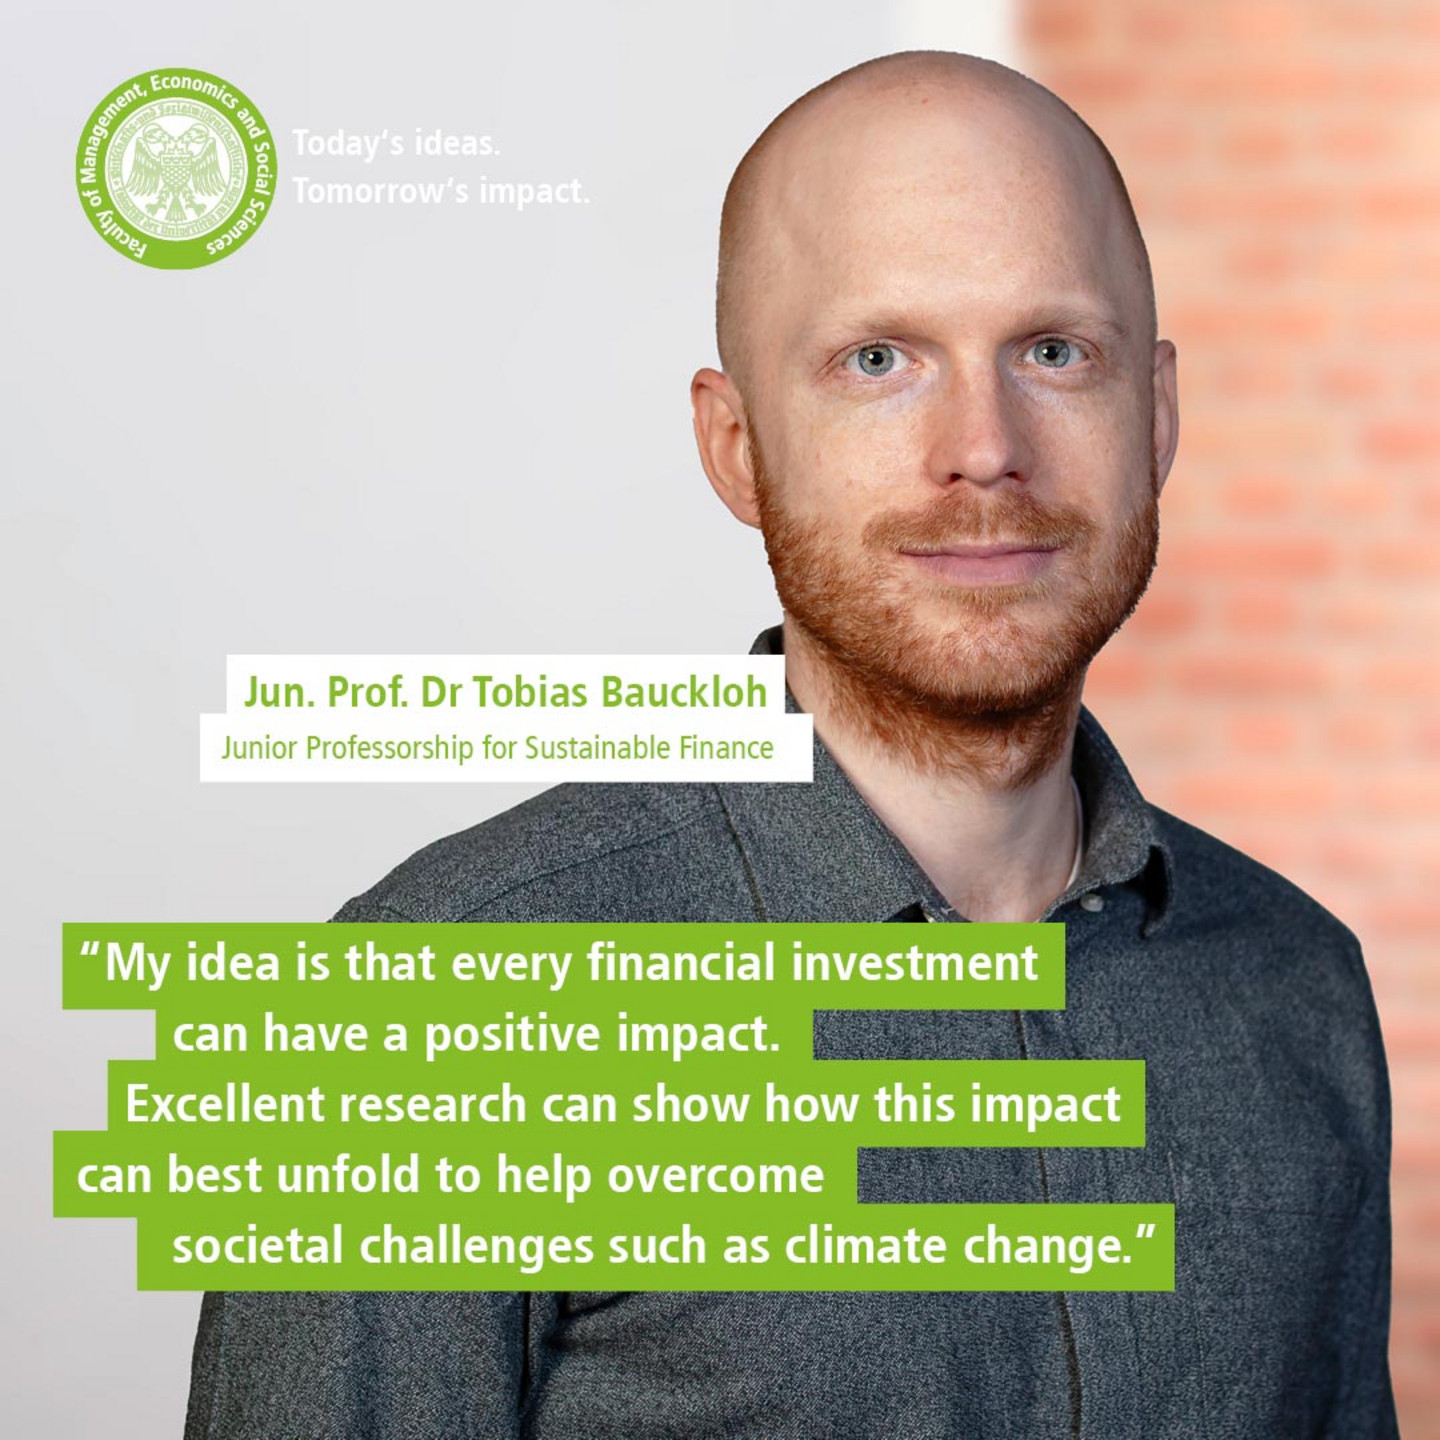 WiSo Juniorprofessor Tobias Bauckloh vor einem WiSo-Banner in geringer Schärfentiefe. Text: „Today’s Ideas. Tomorrow’s Impact. - My idea is that every financial investment can have a positive impact. Excellent research can show how this impact can best unfold to help overcome societal challenges such as climate change. - Jun. Prof. Dr. Tobias Bauckloh, Junior Professorship for Sustainable Finance“